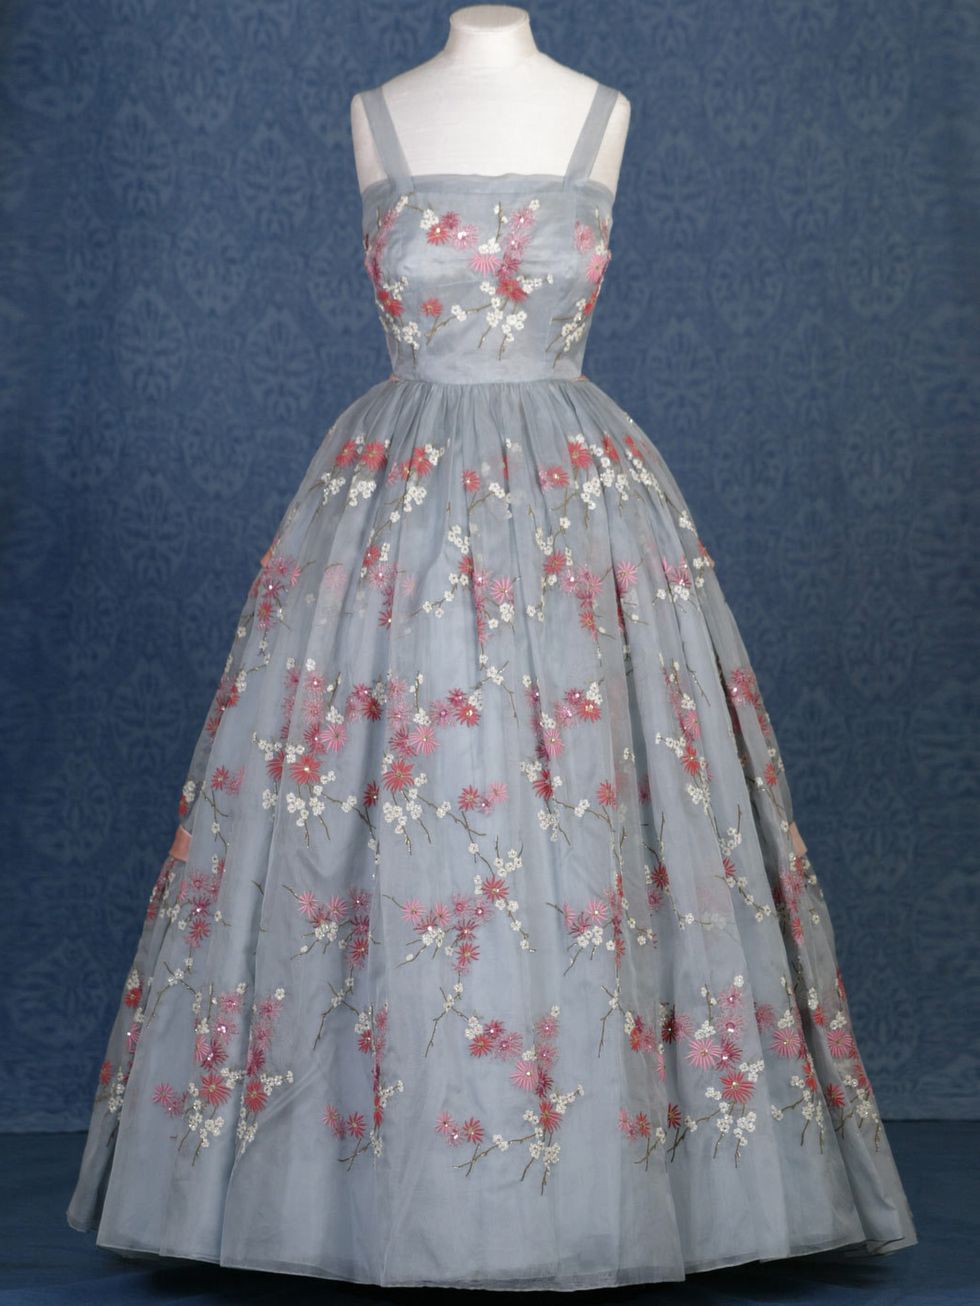 <p>Hardy Amies evening gown worn by HM The Queen in 1958</p>